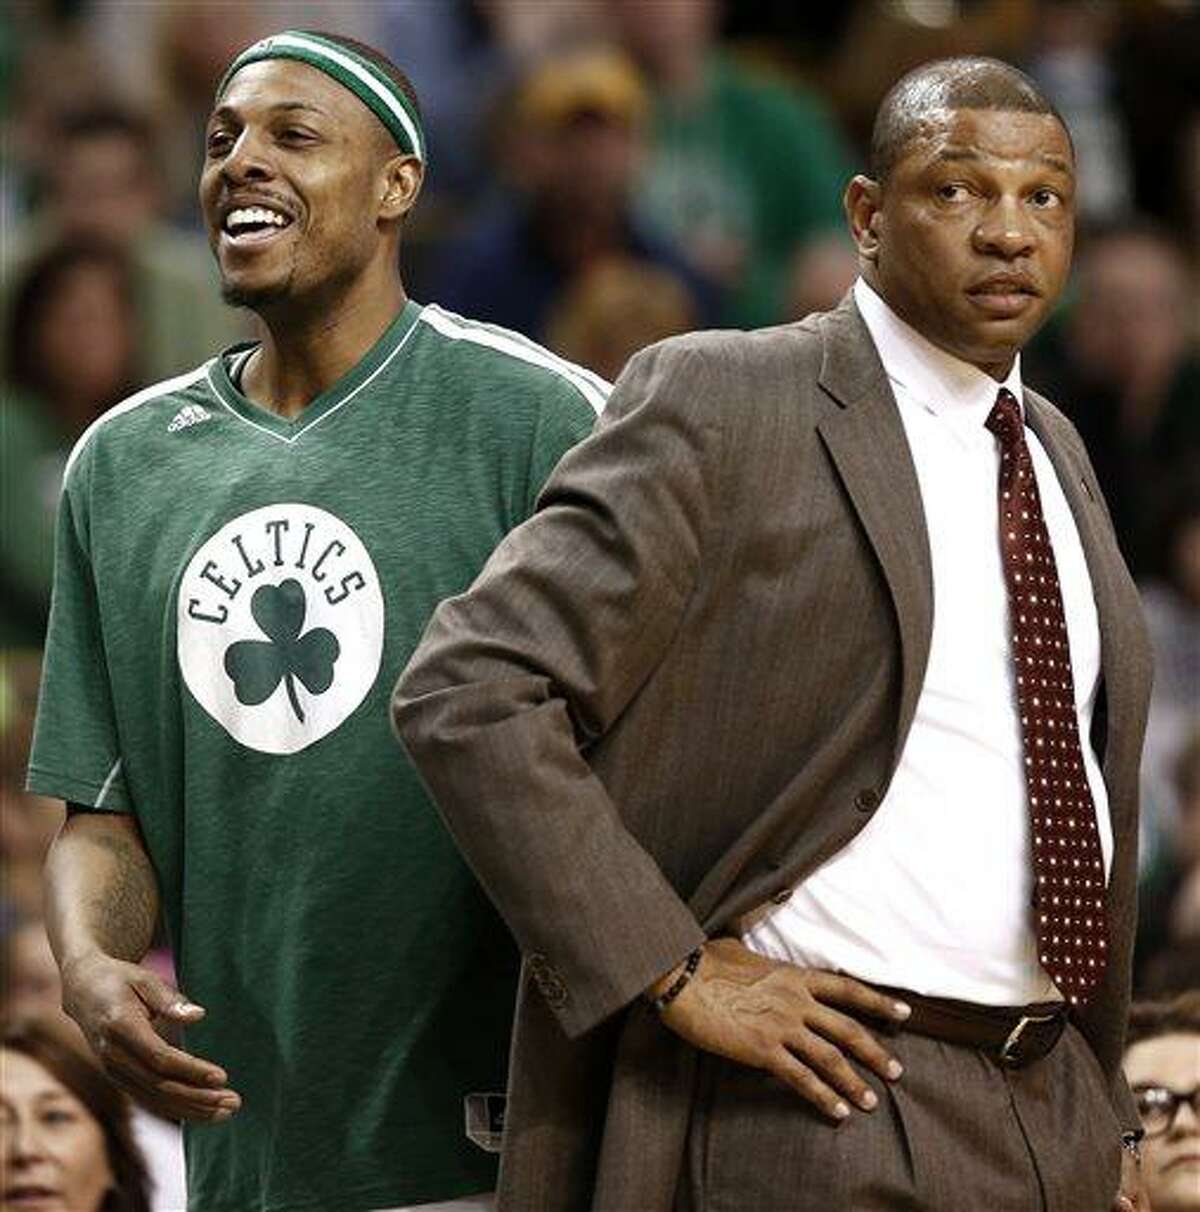 Boston Celtics' Paul Pierce, left, smiles next to head coach Doc Rivers during the fourth quarter of their 107-96 win over the Washington Wizards in an NBA basketball game in Boston, Sunday, April 7, 2013. (AP Photo/Winslow Townson)